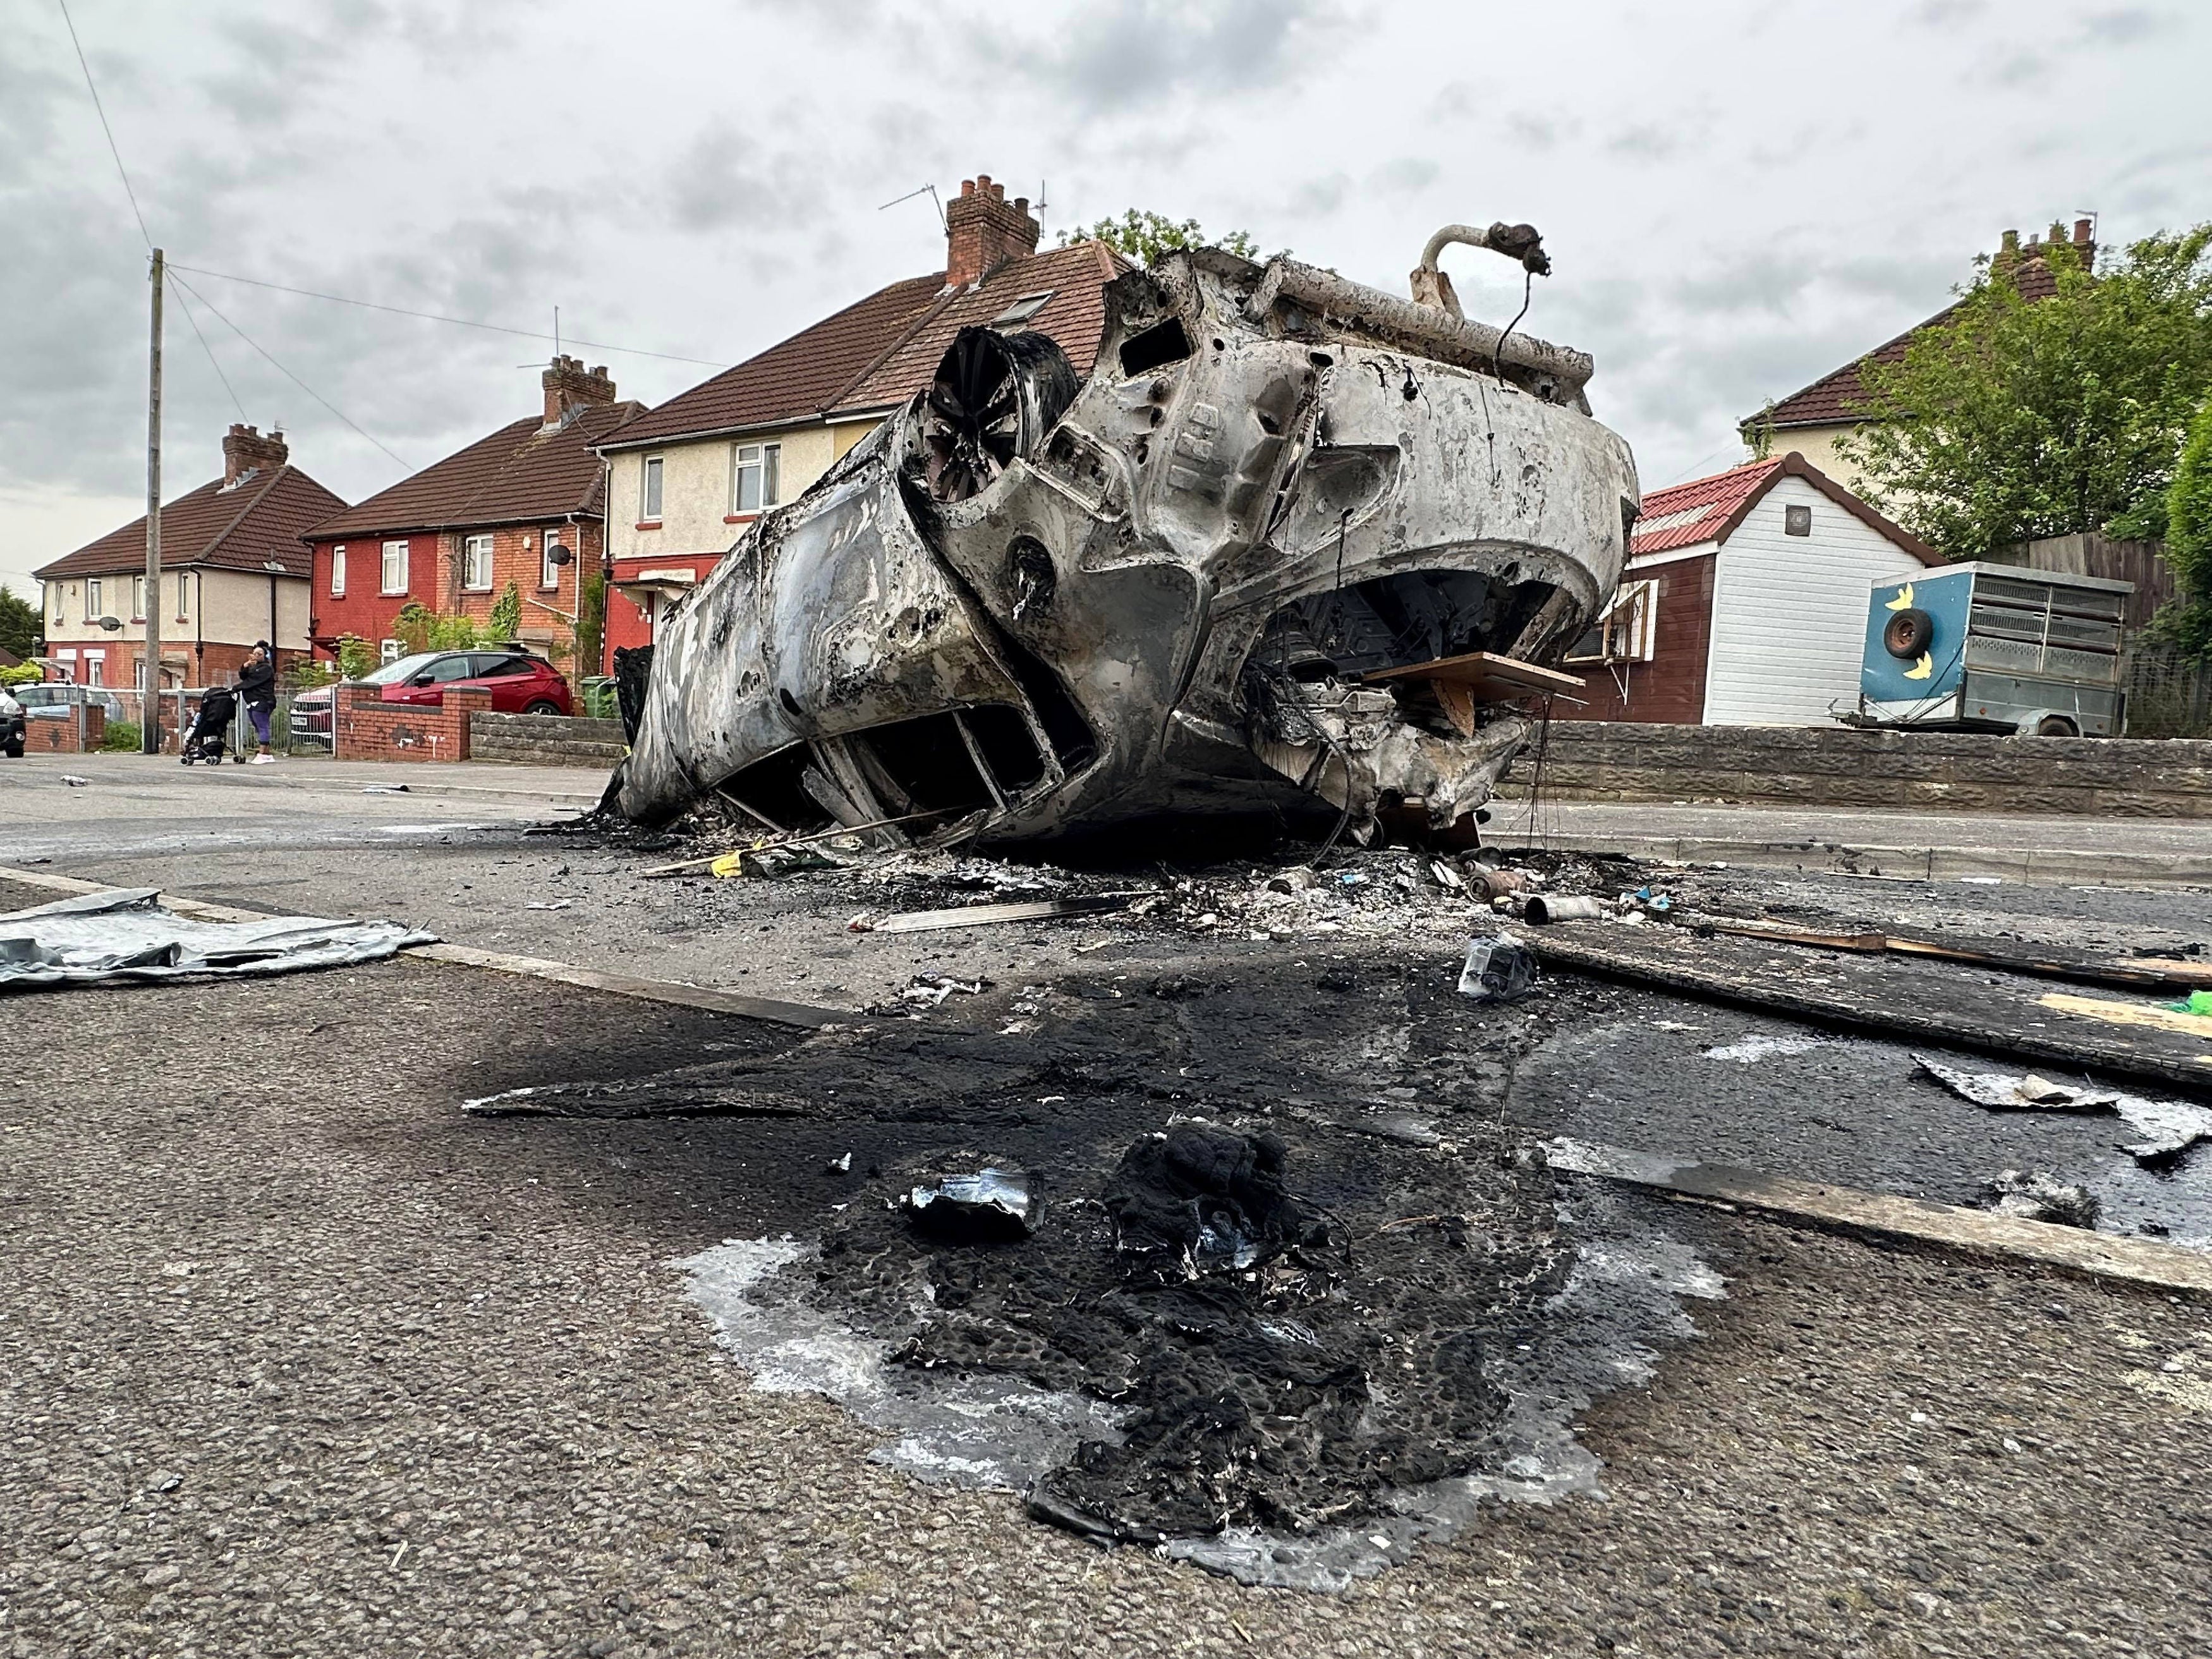 The scene in Ely, Cardiff, following the riot that broke out after two teenagers died in a crash